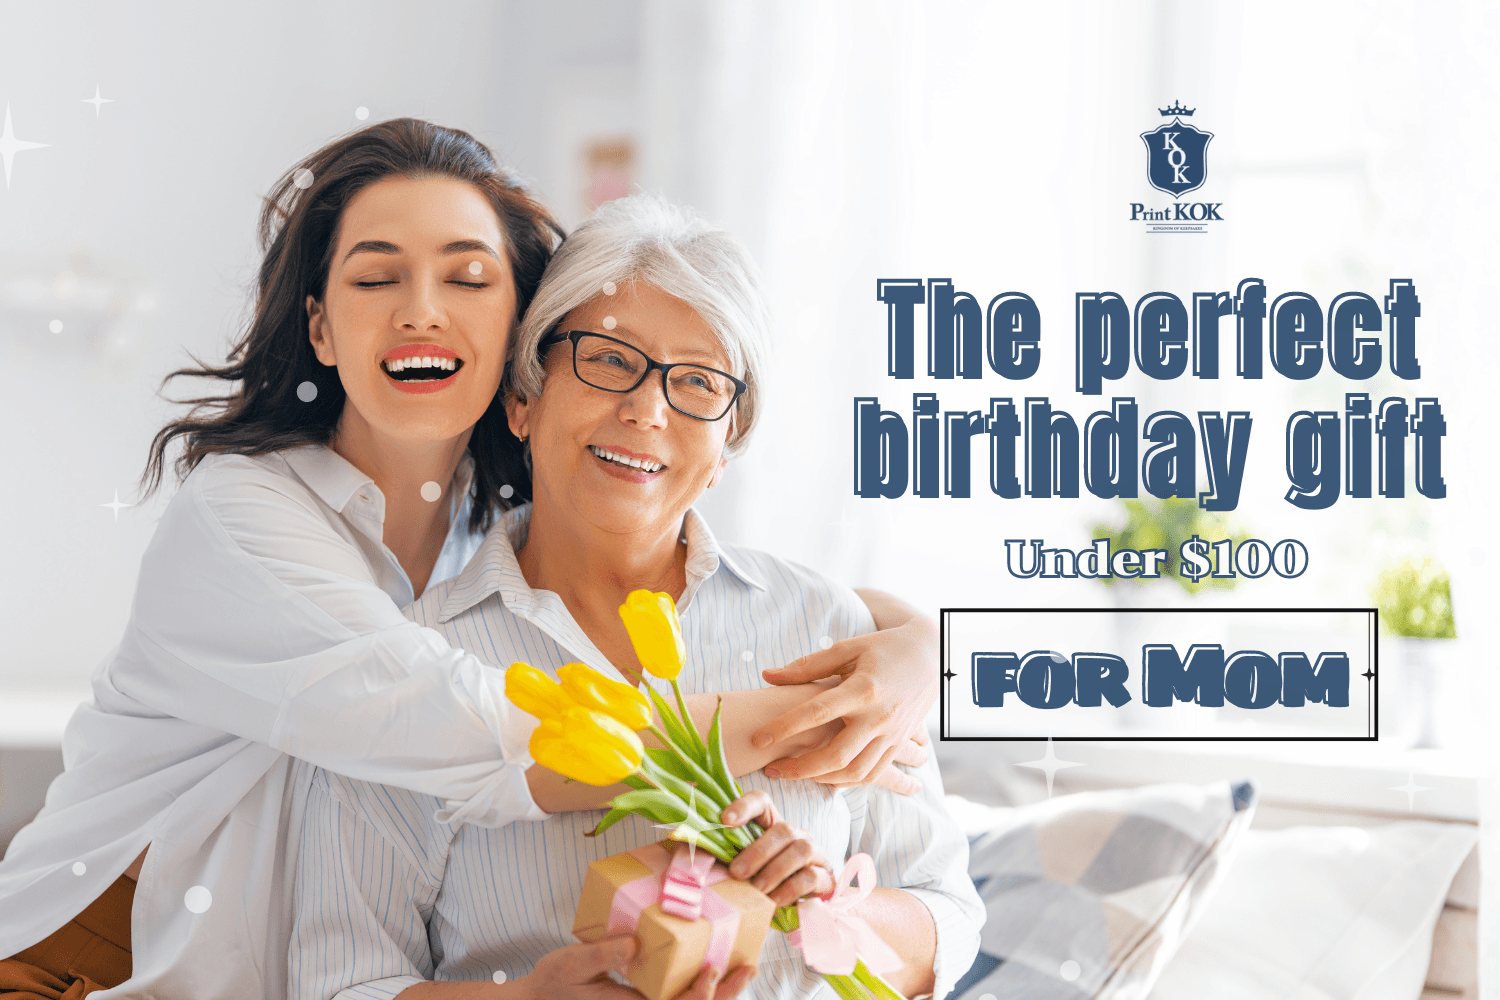 Finding the Perfect Birthday Gift for Mom Under $100